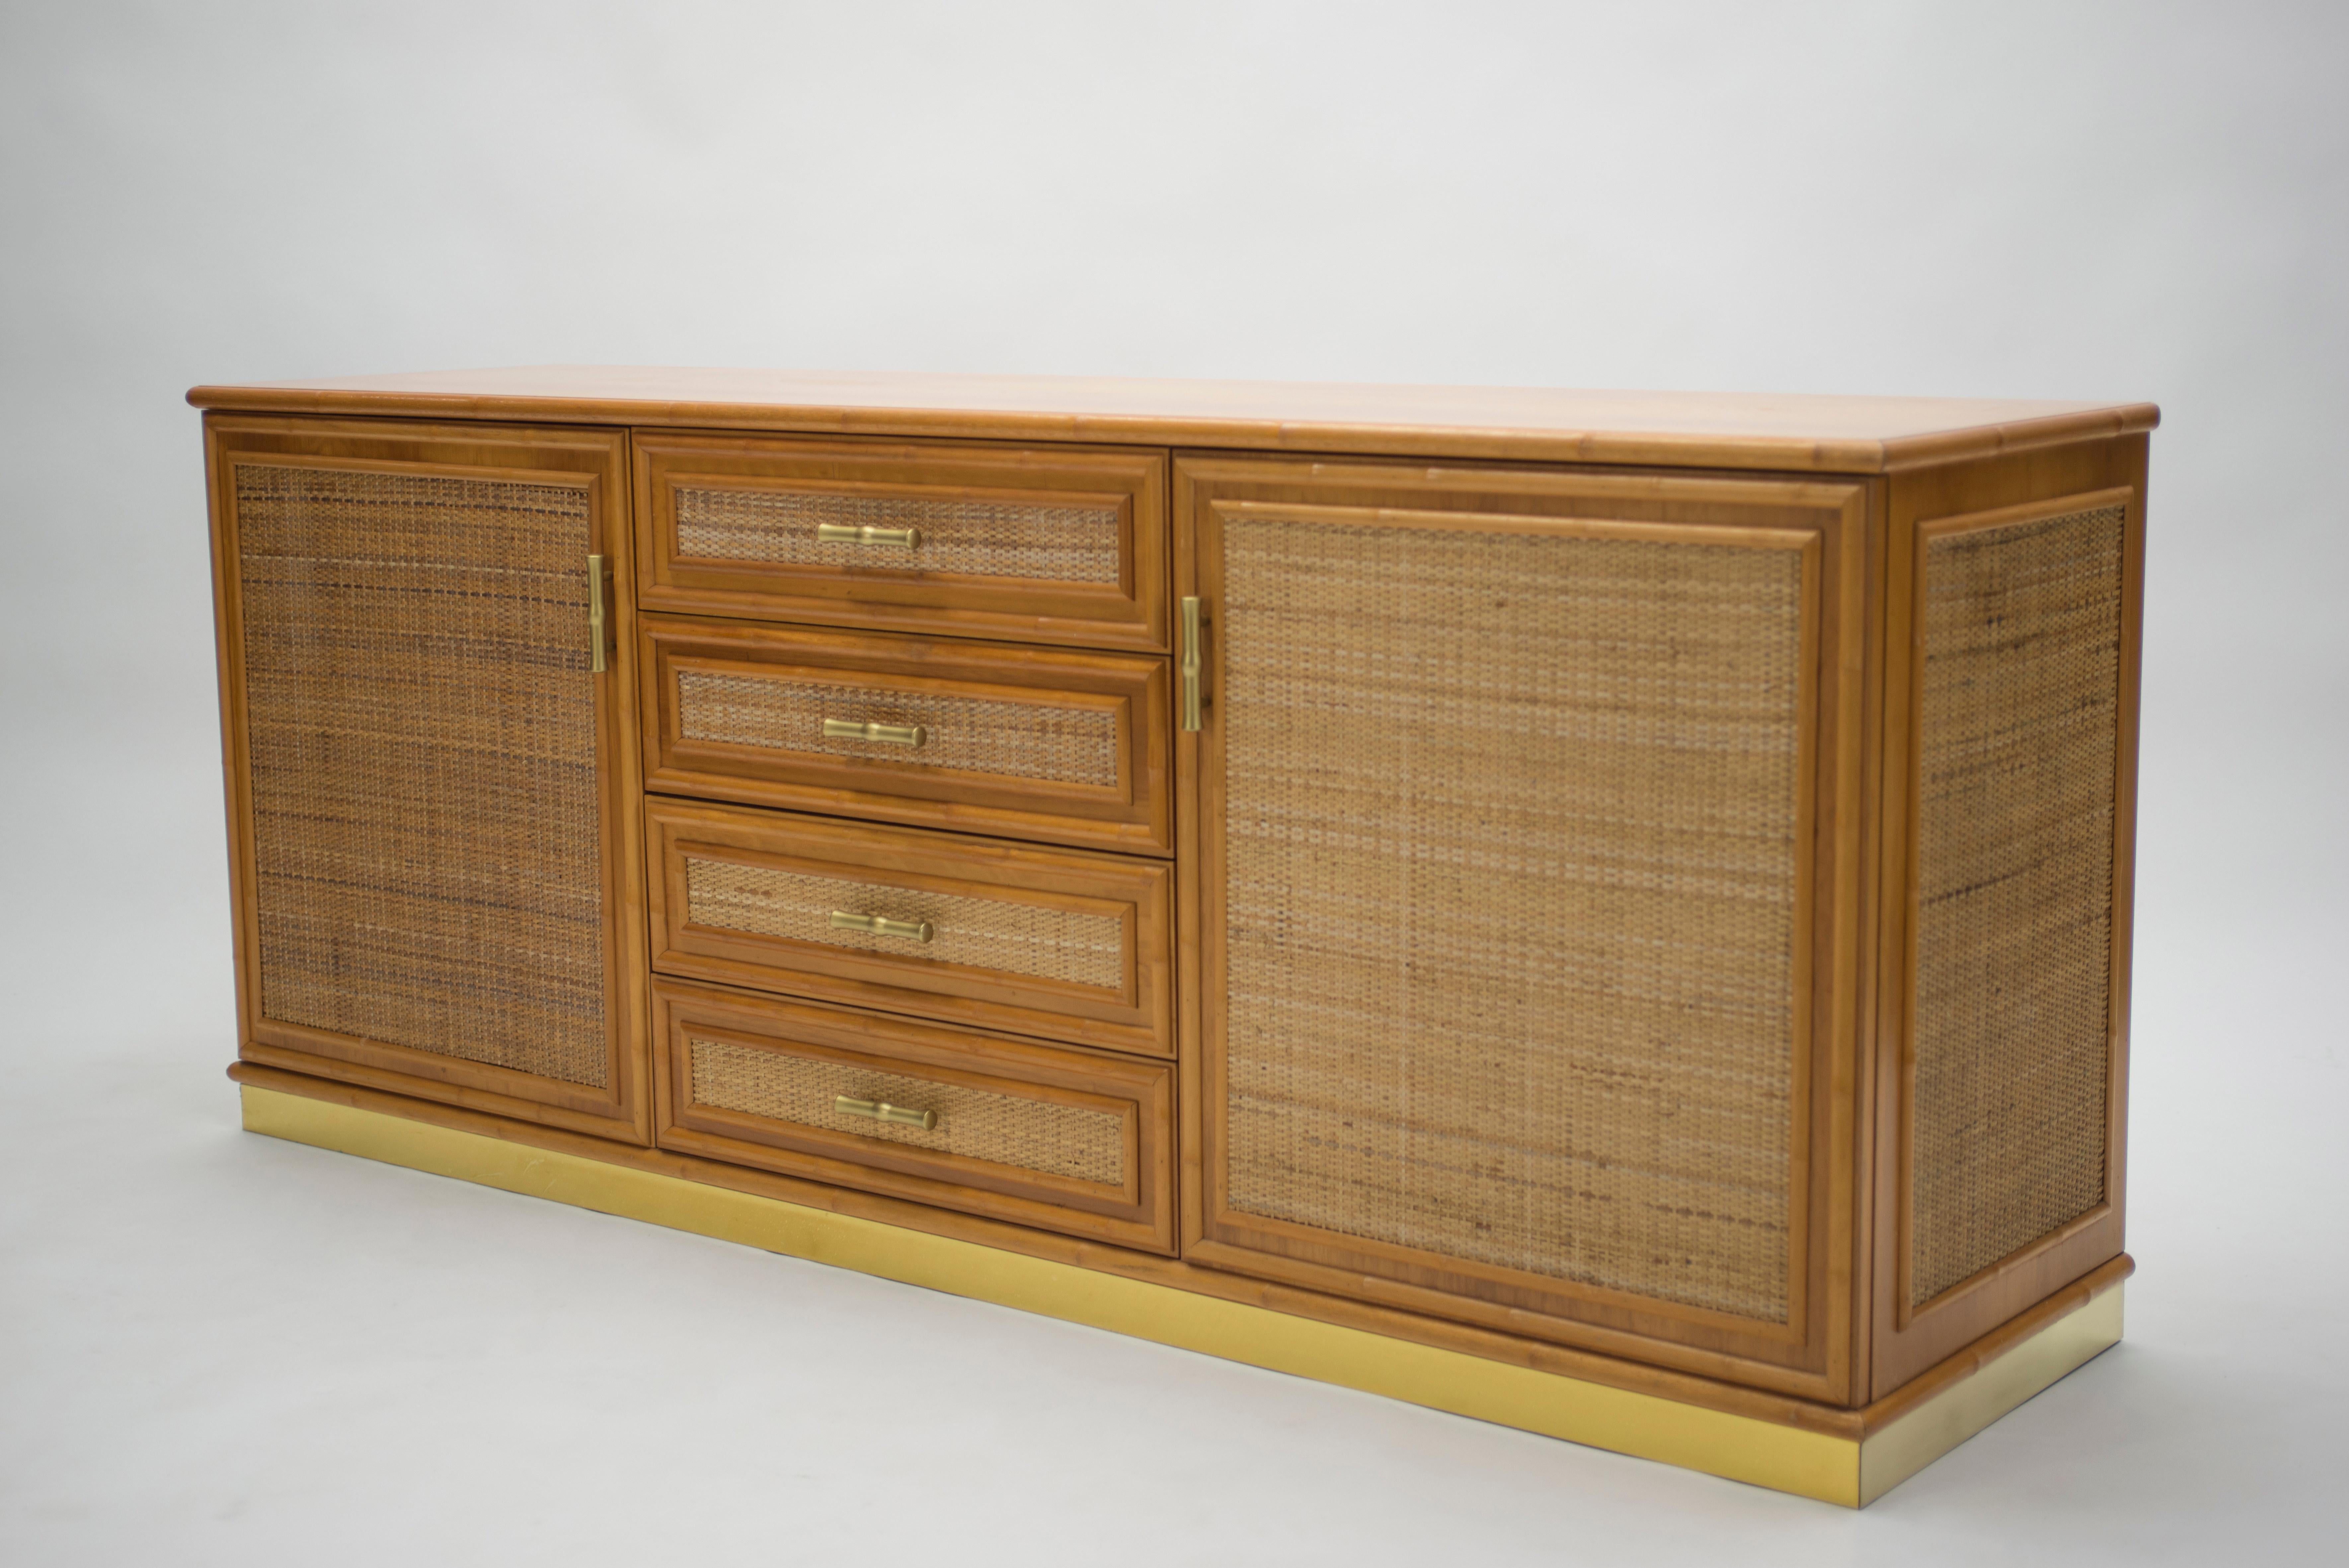 Natural bamboo as the chief material creates a summery, organic aesthetic in this 1970s sideboard, while a bright brass base and accents are strong, eye-catching touches. In particular, the brass handles on the drawers and doors are lovely examples